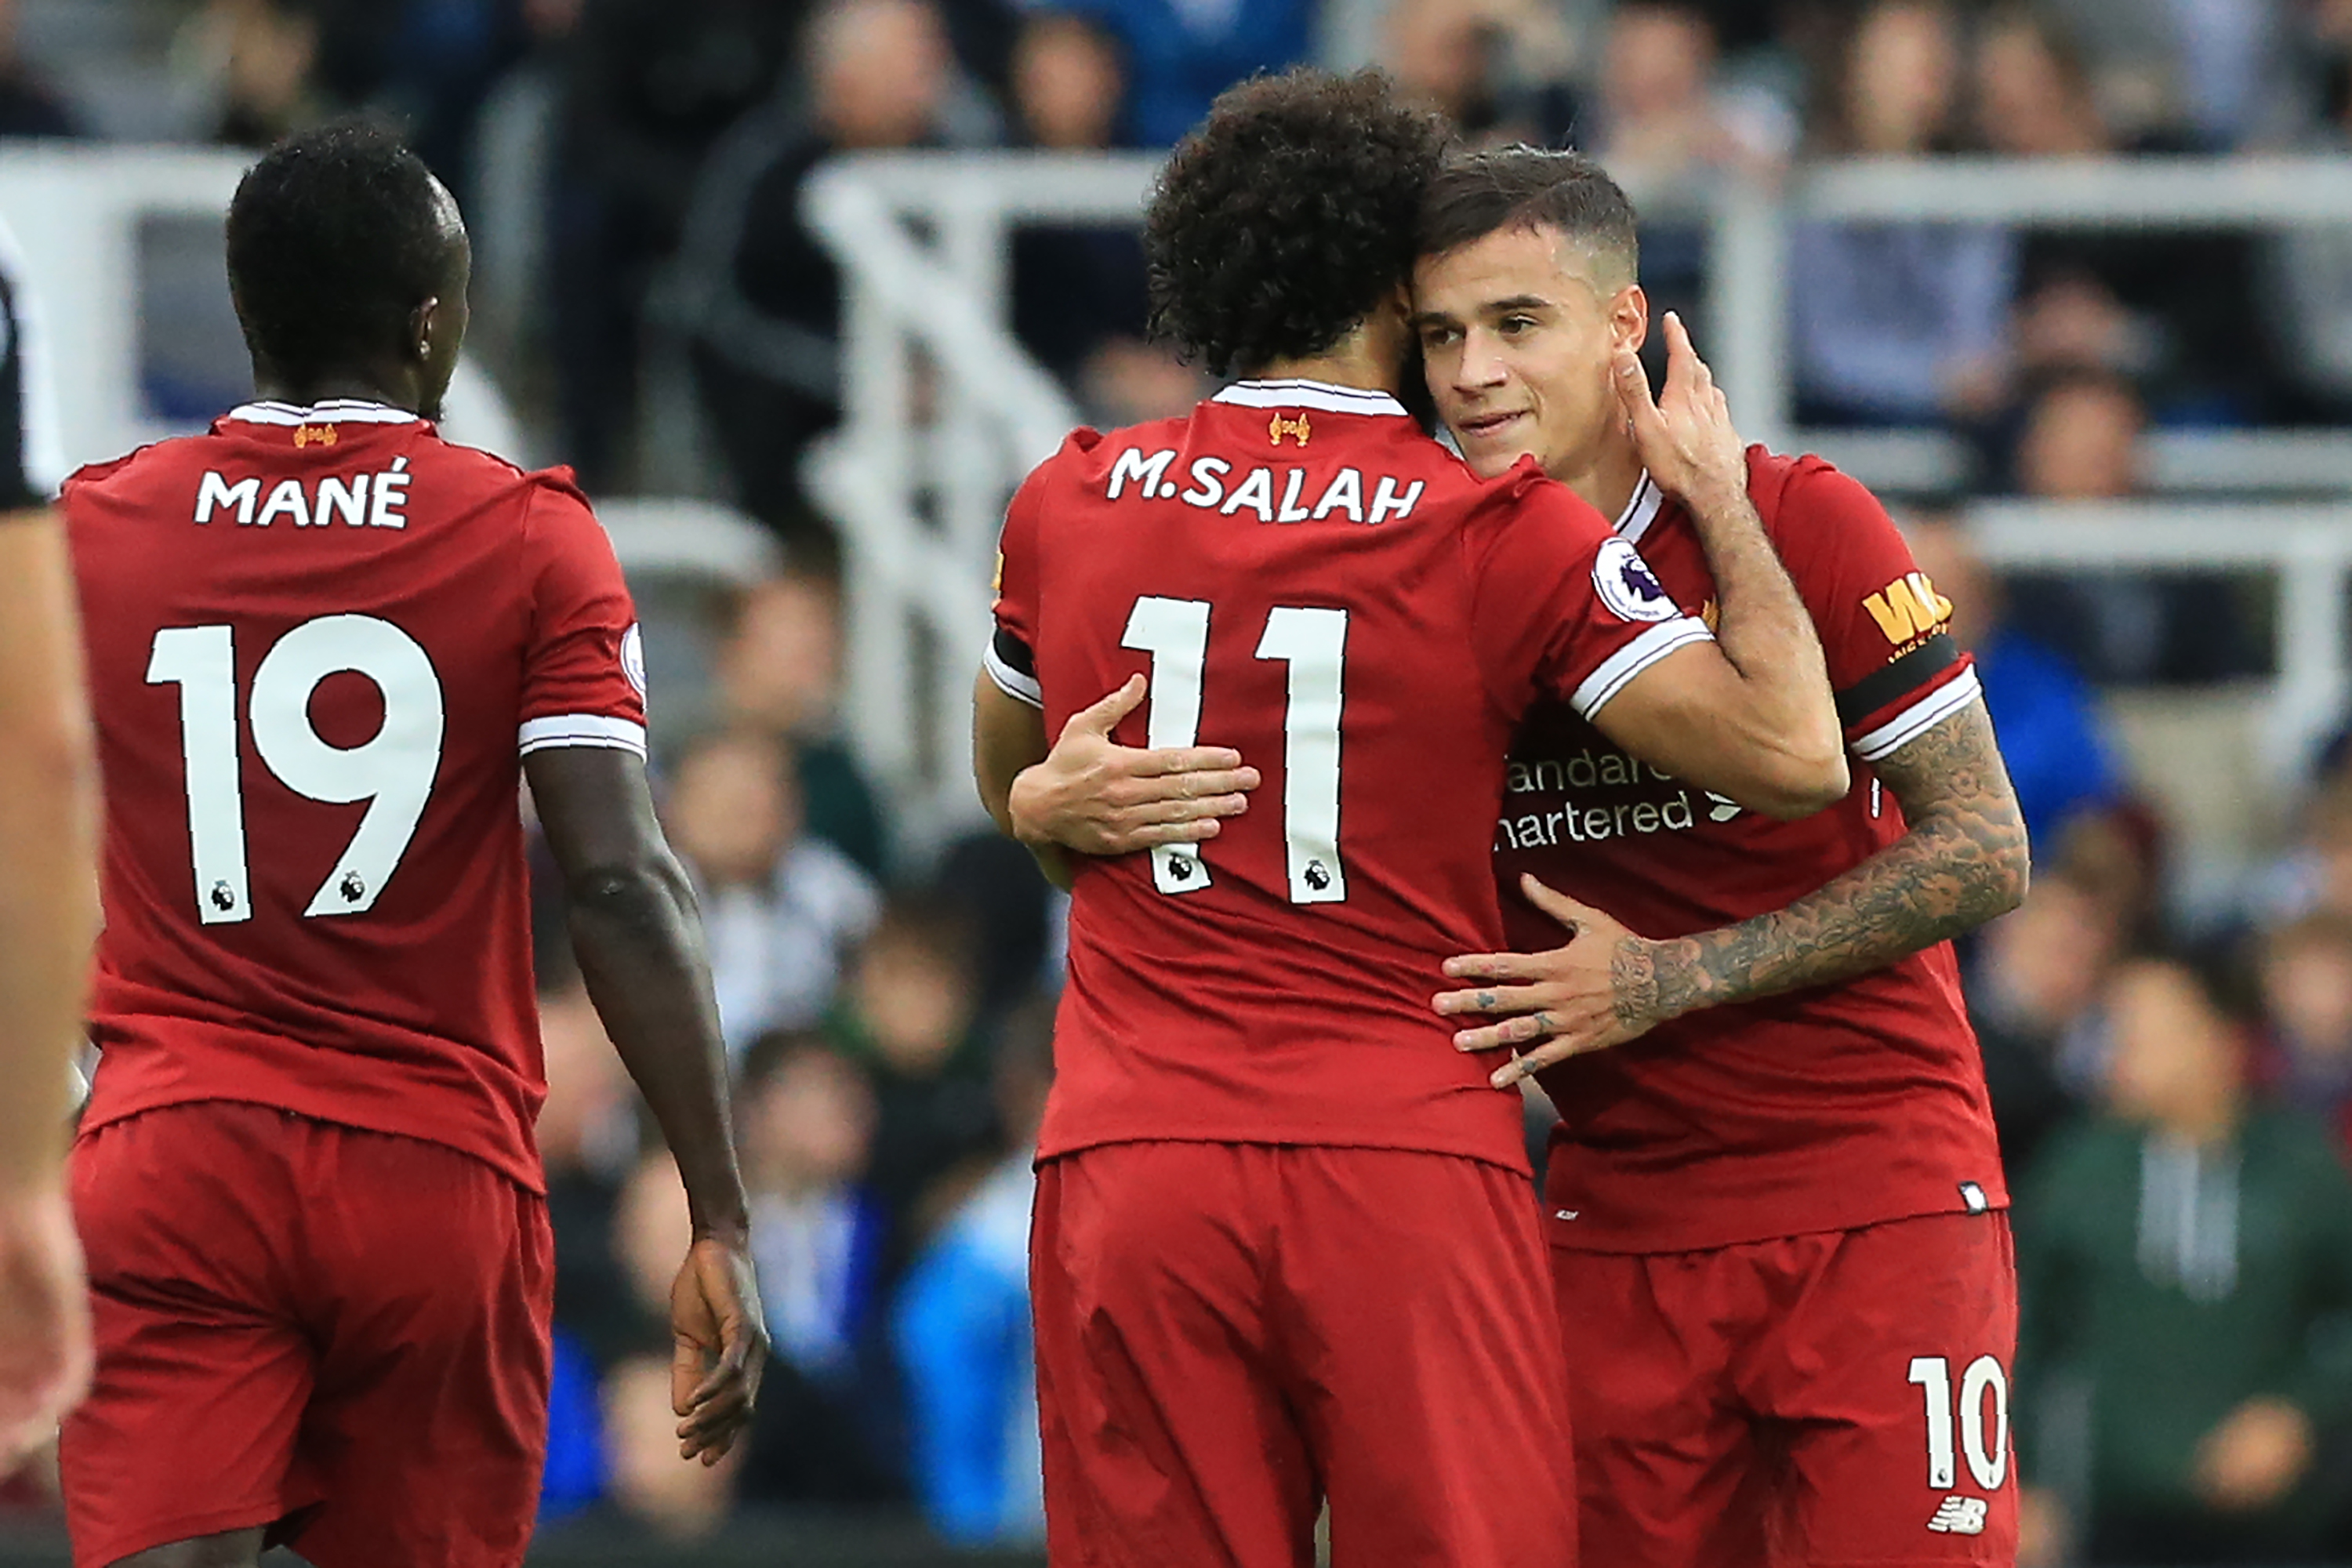 Liverpool's Brazilian midfielder Philippe Coutinho (R) celebrates with Liverpool's Egyptian midfielder Mohamed Salah after scoring the opening goal of the English Premier League football match between Newcastle United and Liverpool at St James' Park in Newcastle-upon-Tyne, north east England on October 1, 2017. / AFP PHOTO / Lindsey PARNABY / RESTRICTED TO EDITORIAL USE. No use with unauthorized audio, video, data, fixture lists, club/league logos or 'live' services. Online in-match use limited to 75 images, no video emulation. No use in betting, games or single club/league/player publications.  /         (Photo credit should read LINDSEY PARNABY/AFP/Getty Images)